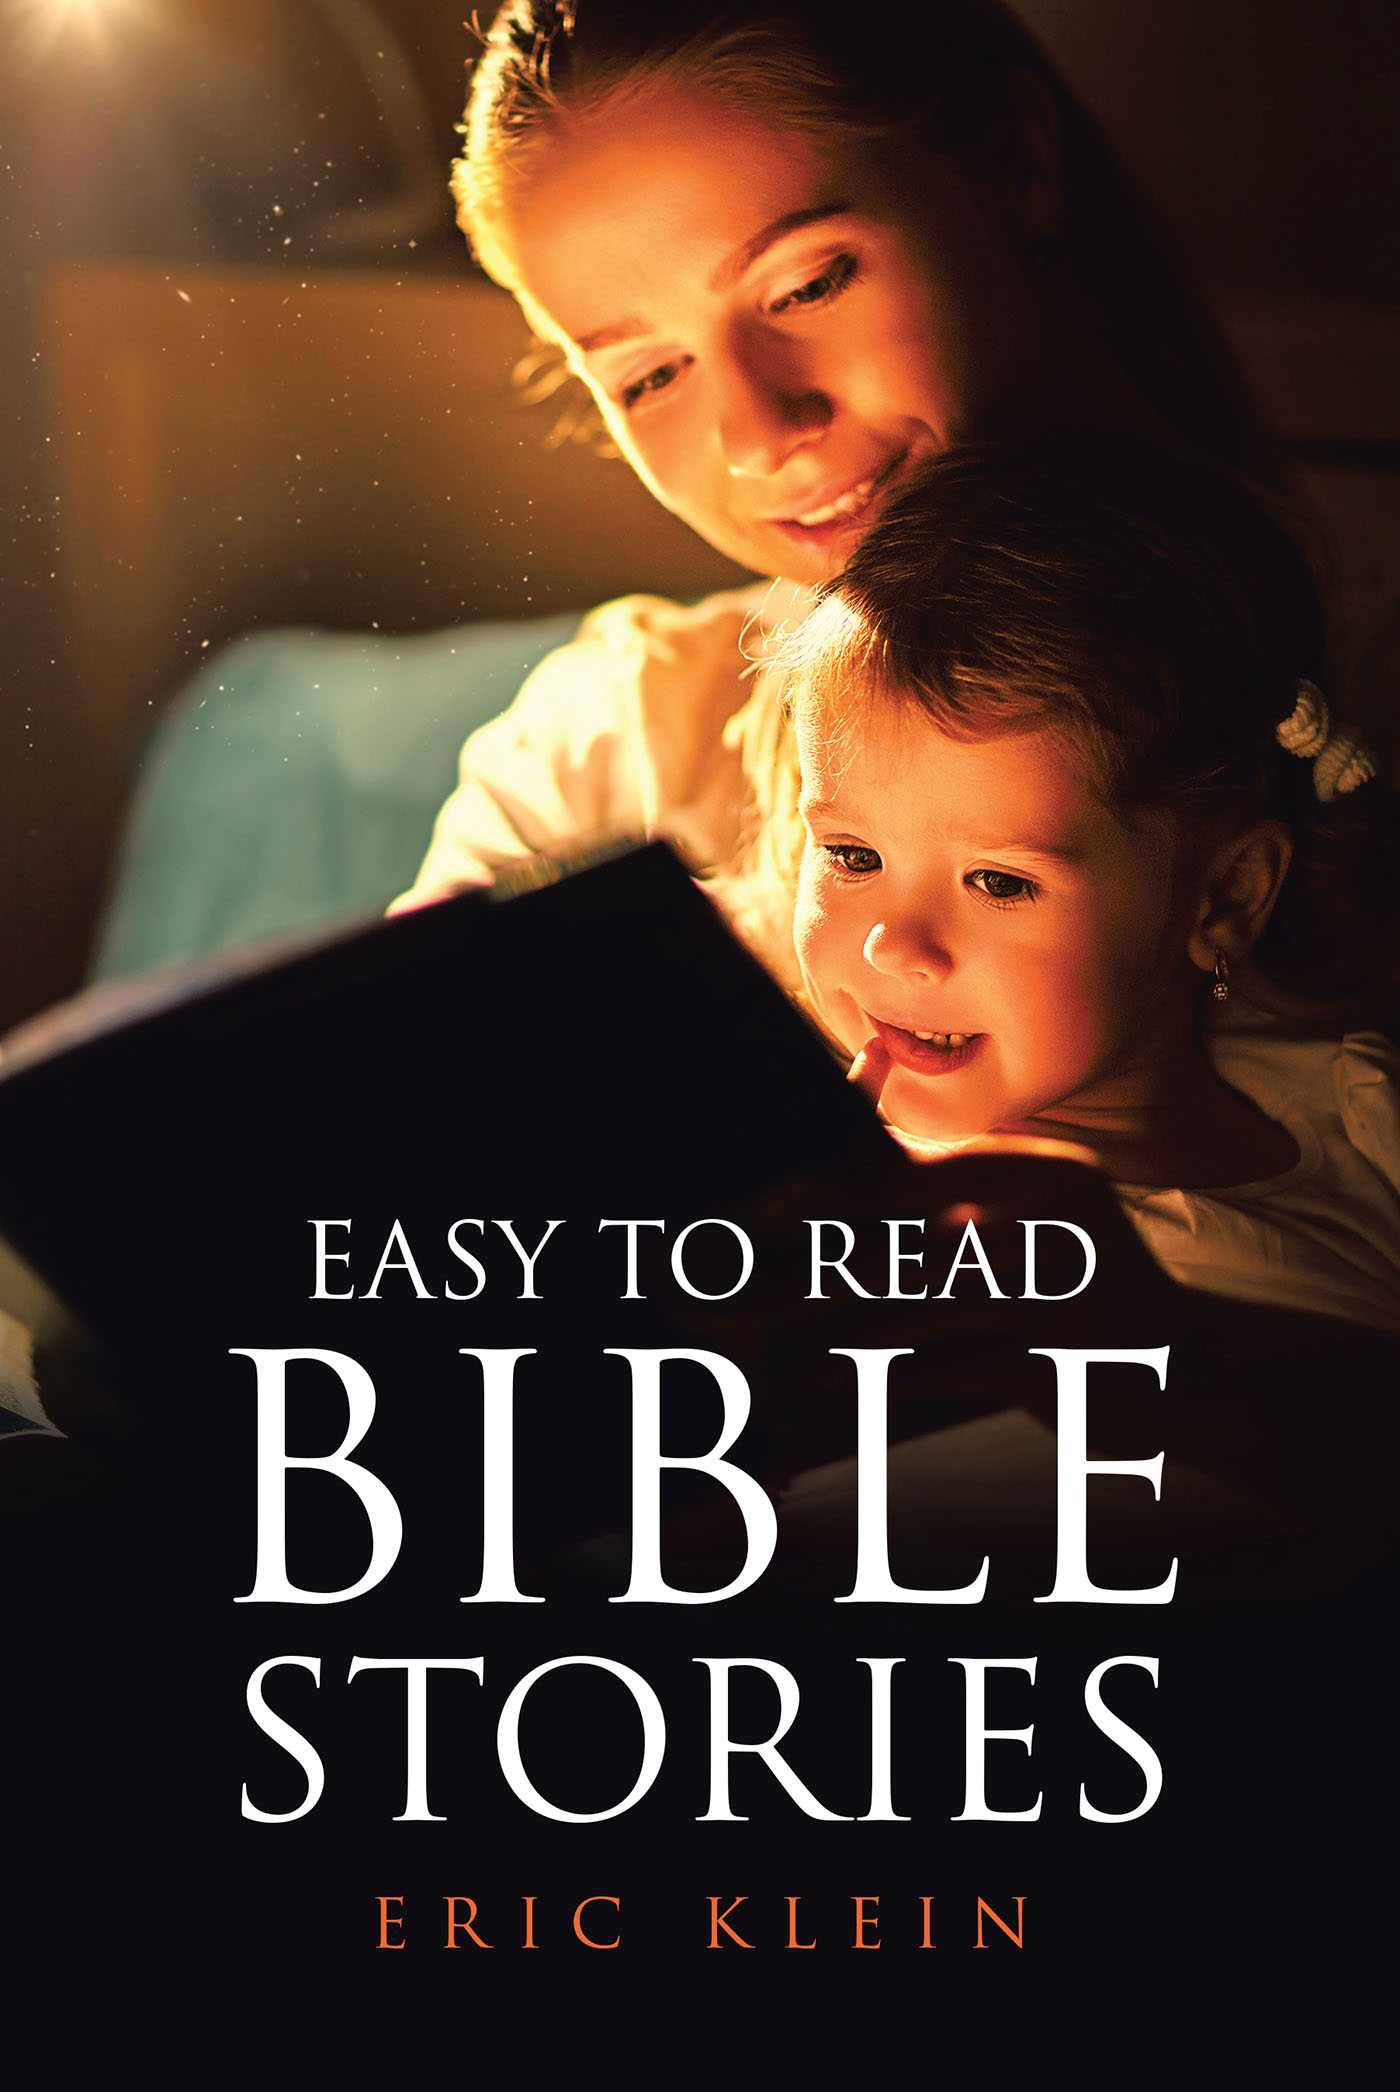 eric-klein-s-newly-released-easy-to-read-bible-stories-is-an-inviting